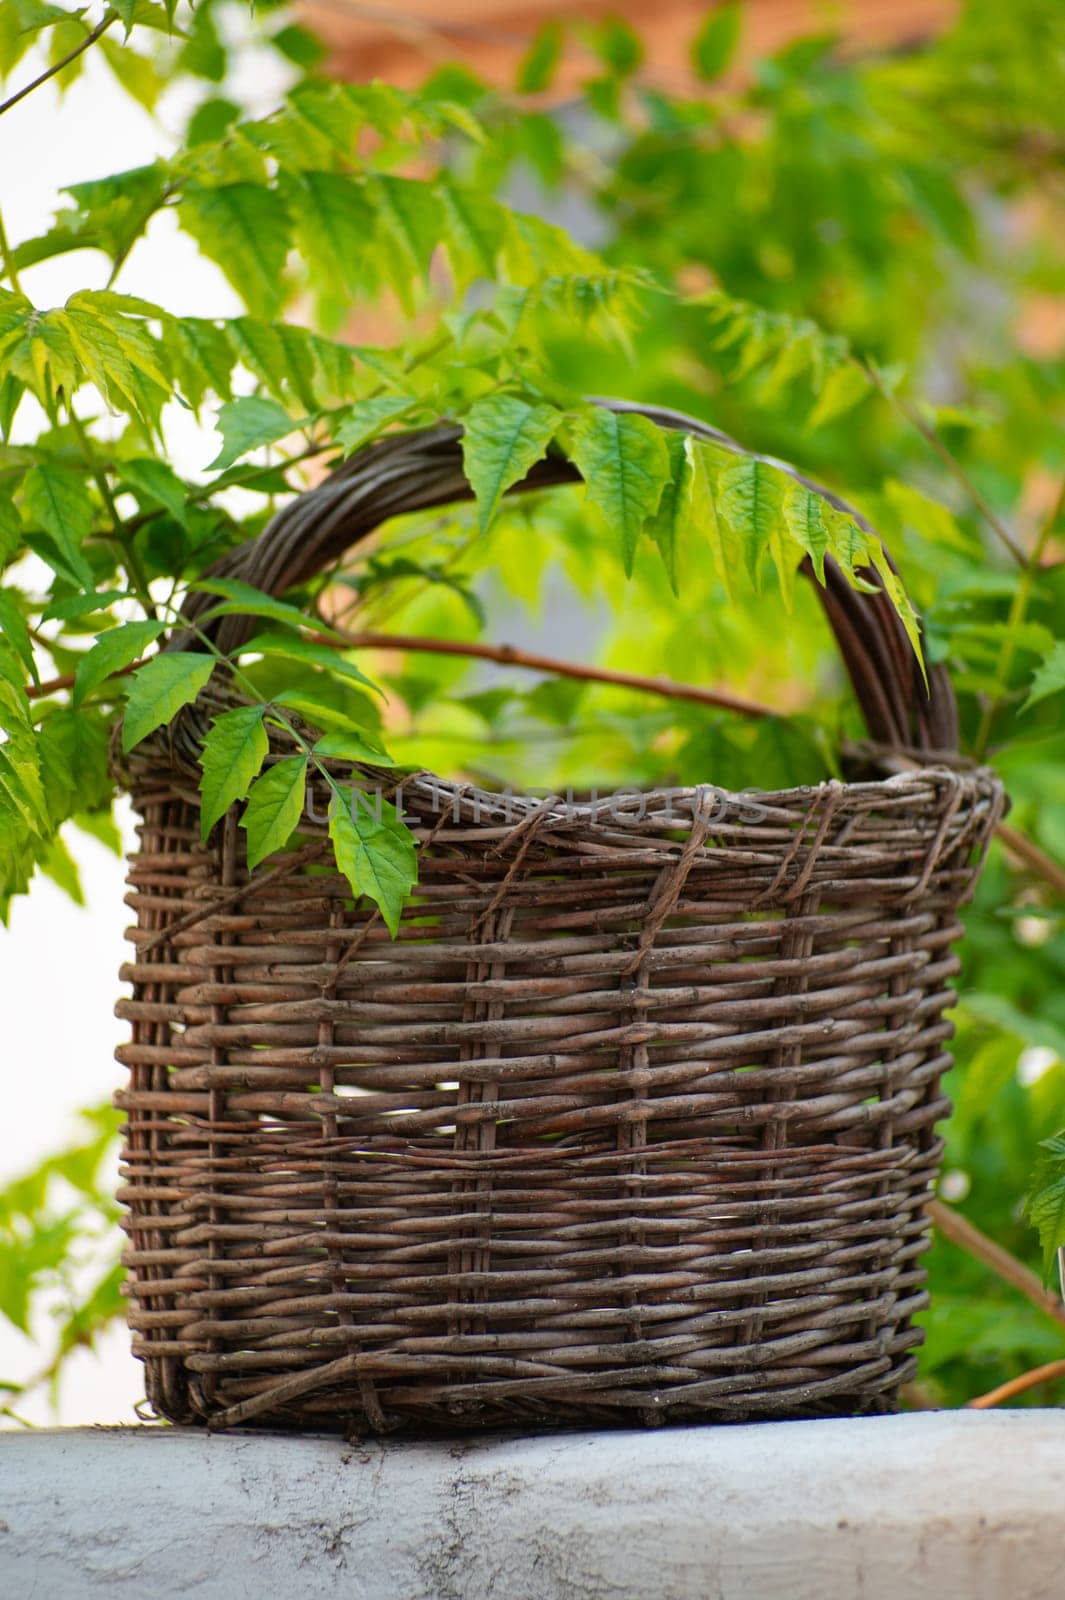 A wicker basket in the backyard garden with branch with green leaves on the foreground by artgf